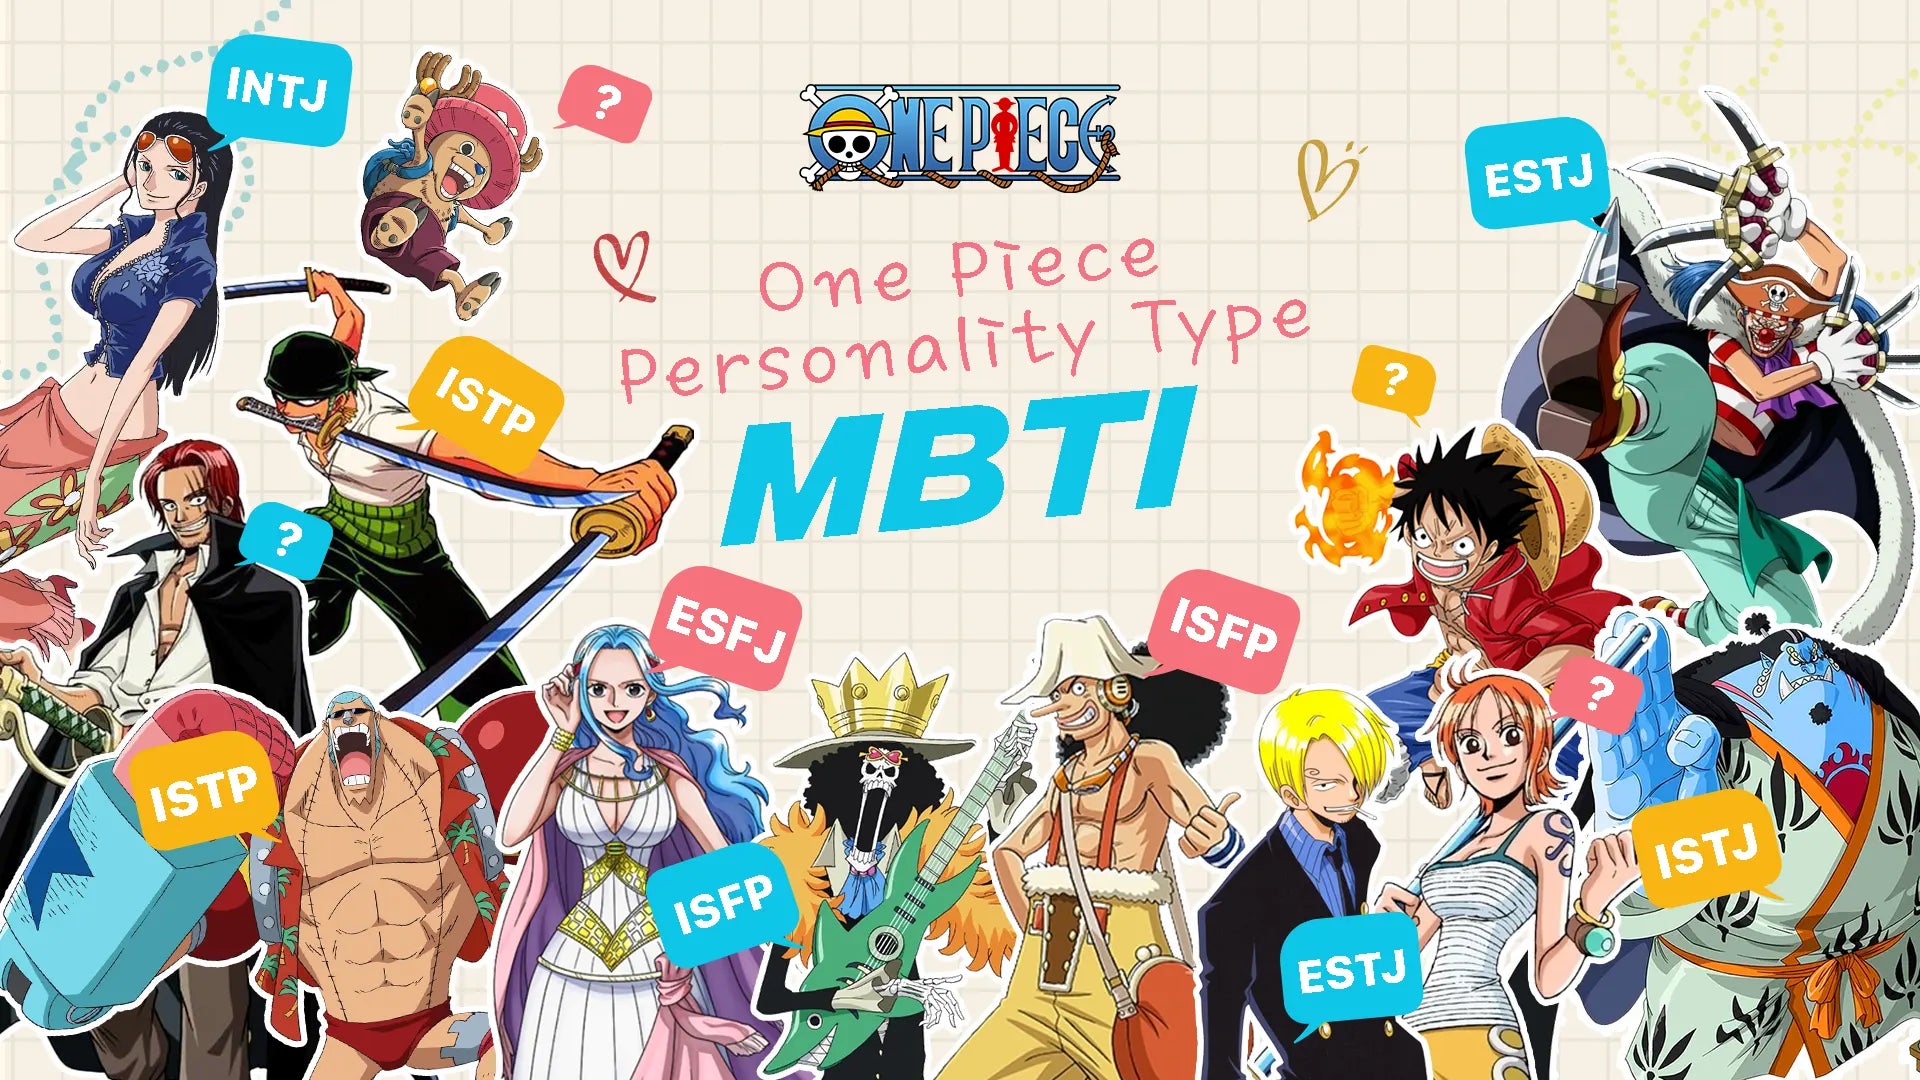 intp anime  Anime, Mbti character, Intp